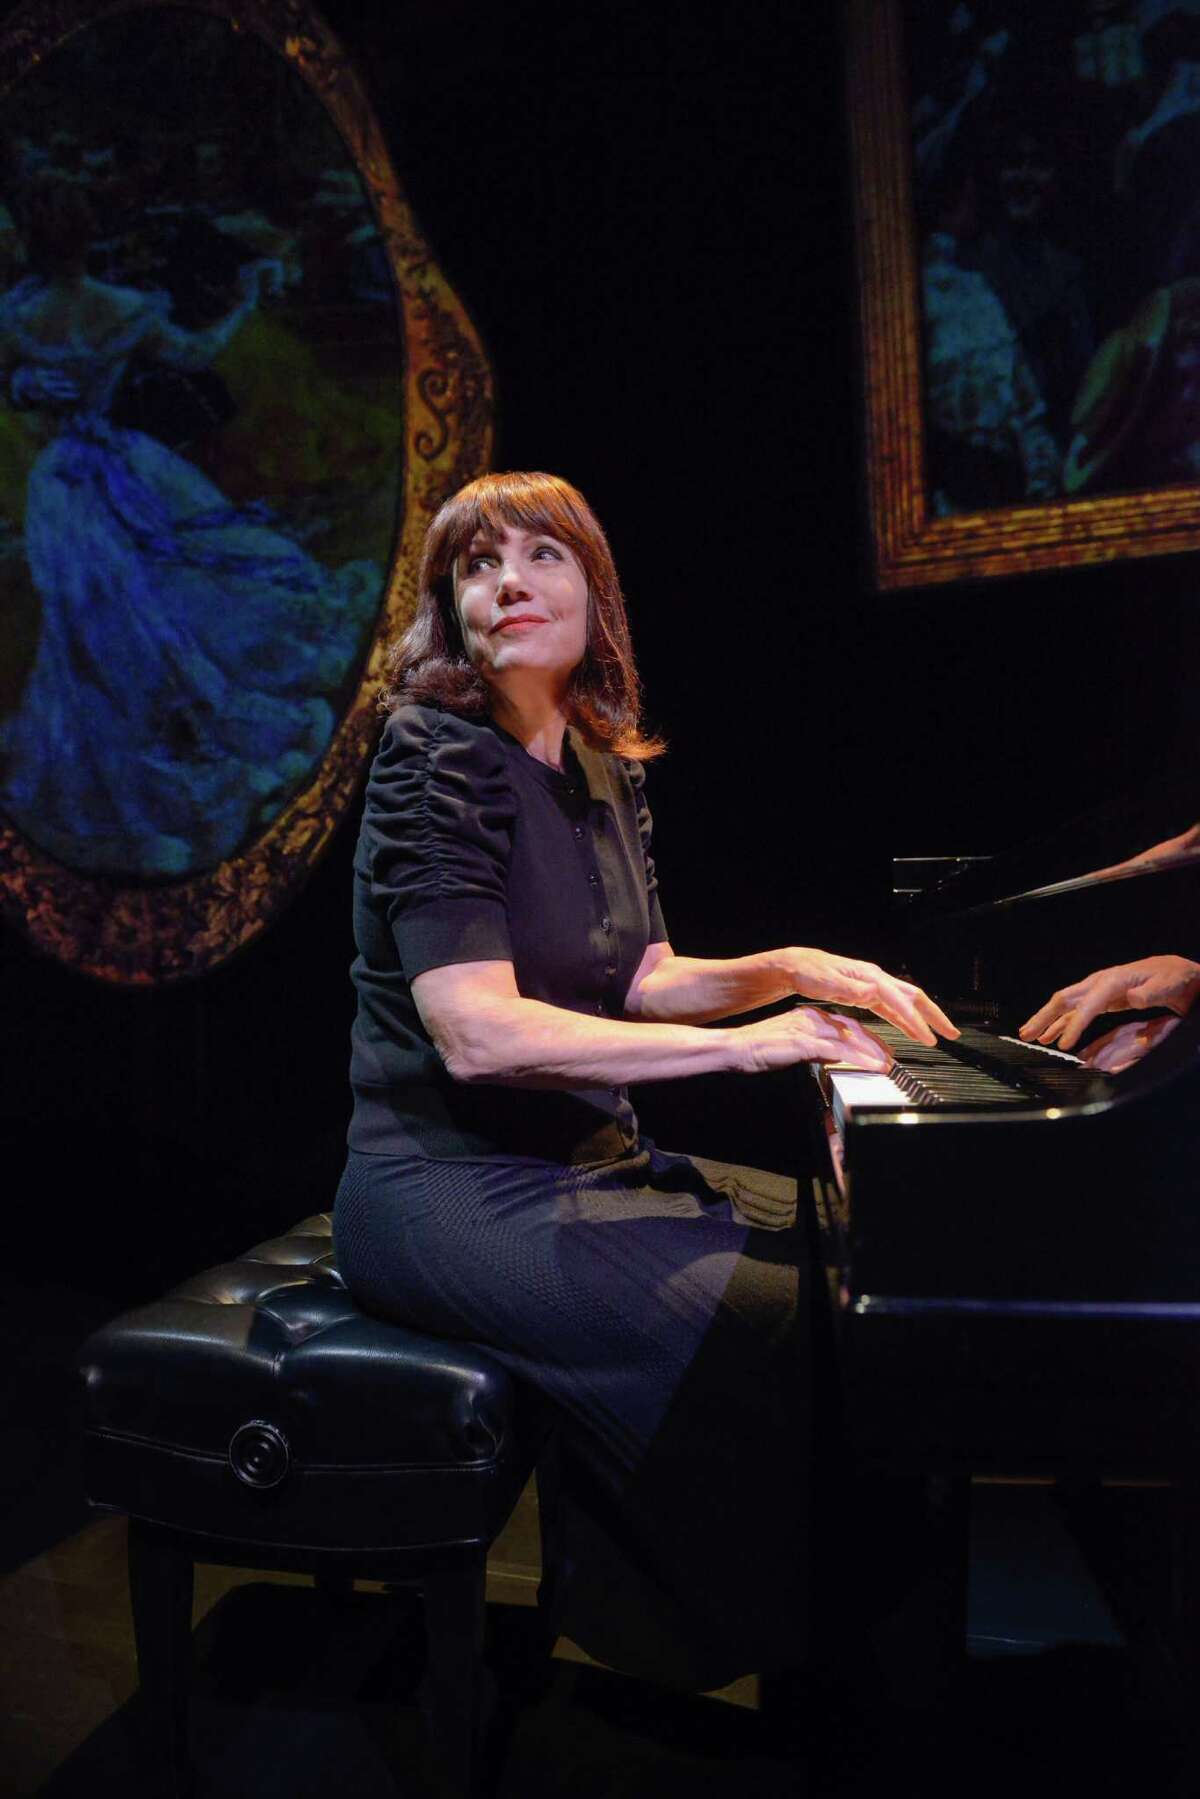 Pianist Mona Golabek is bringing a one-woman play with music about her mother's life during World War II - ìThe Pianist of Willesden Laneî - to Hartford Stage starting March 26.